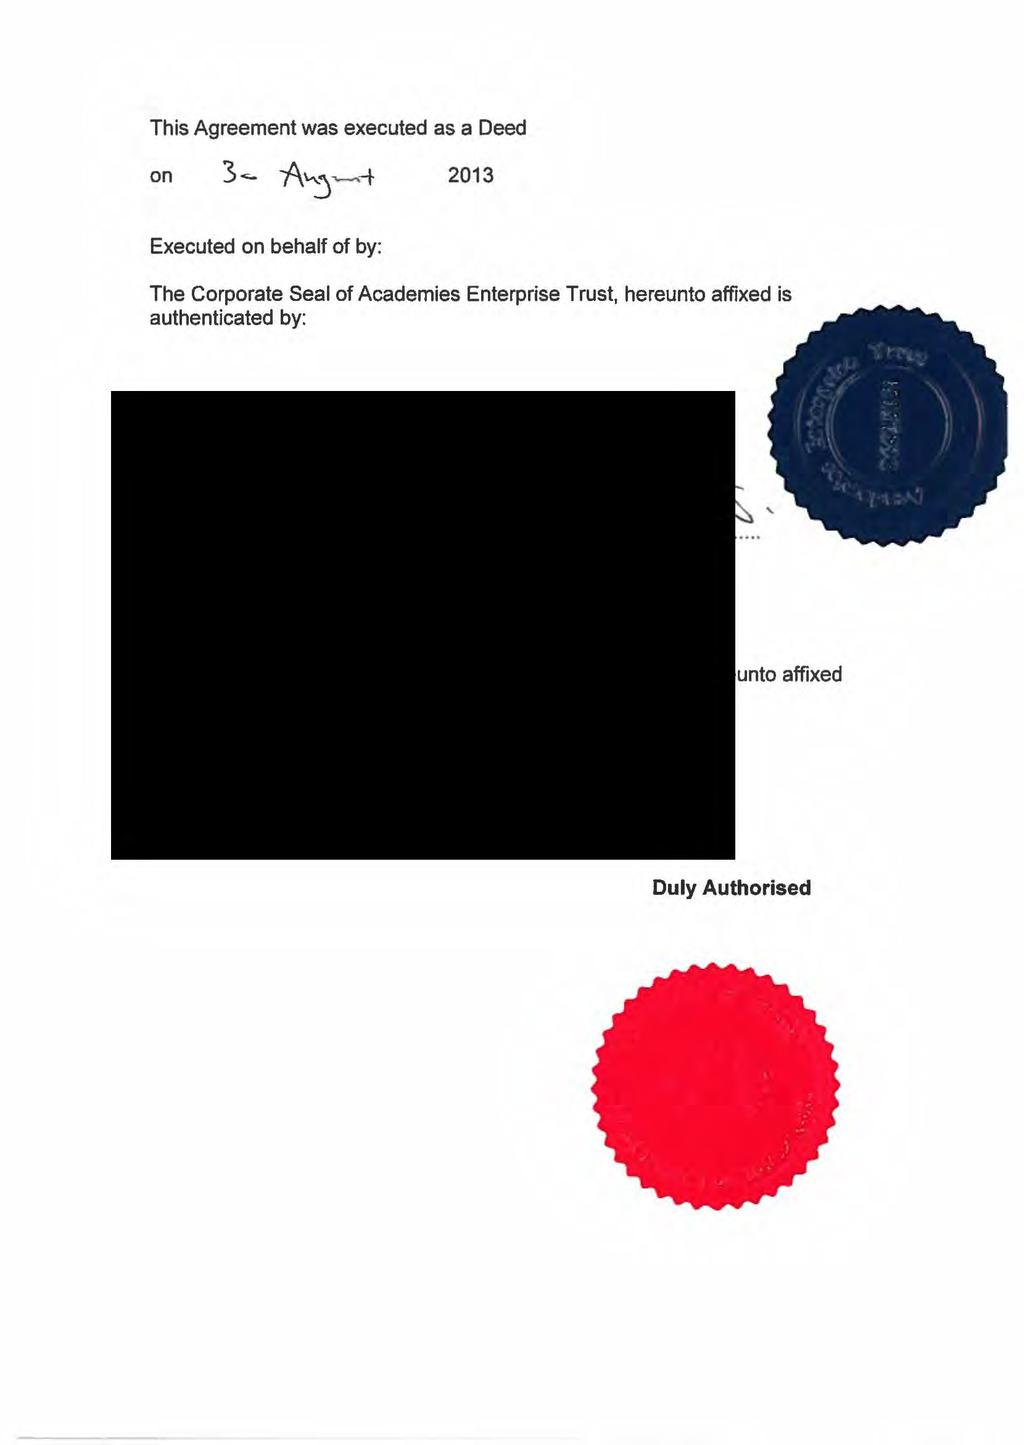 This Agreement was executed as a Deed on 2013 Executed on behalf of by: The Corporate Seal of